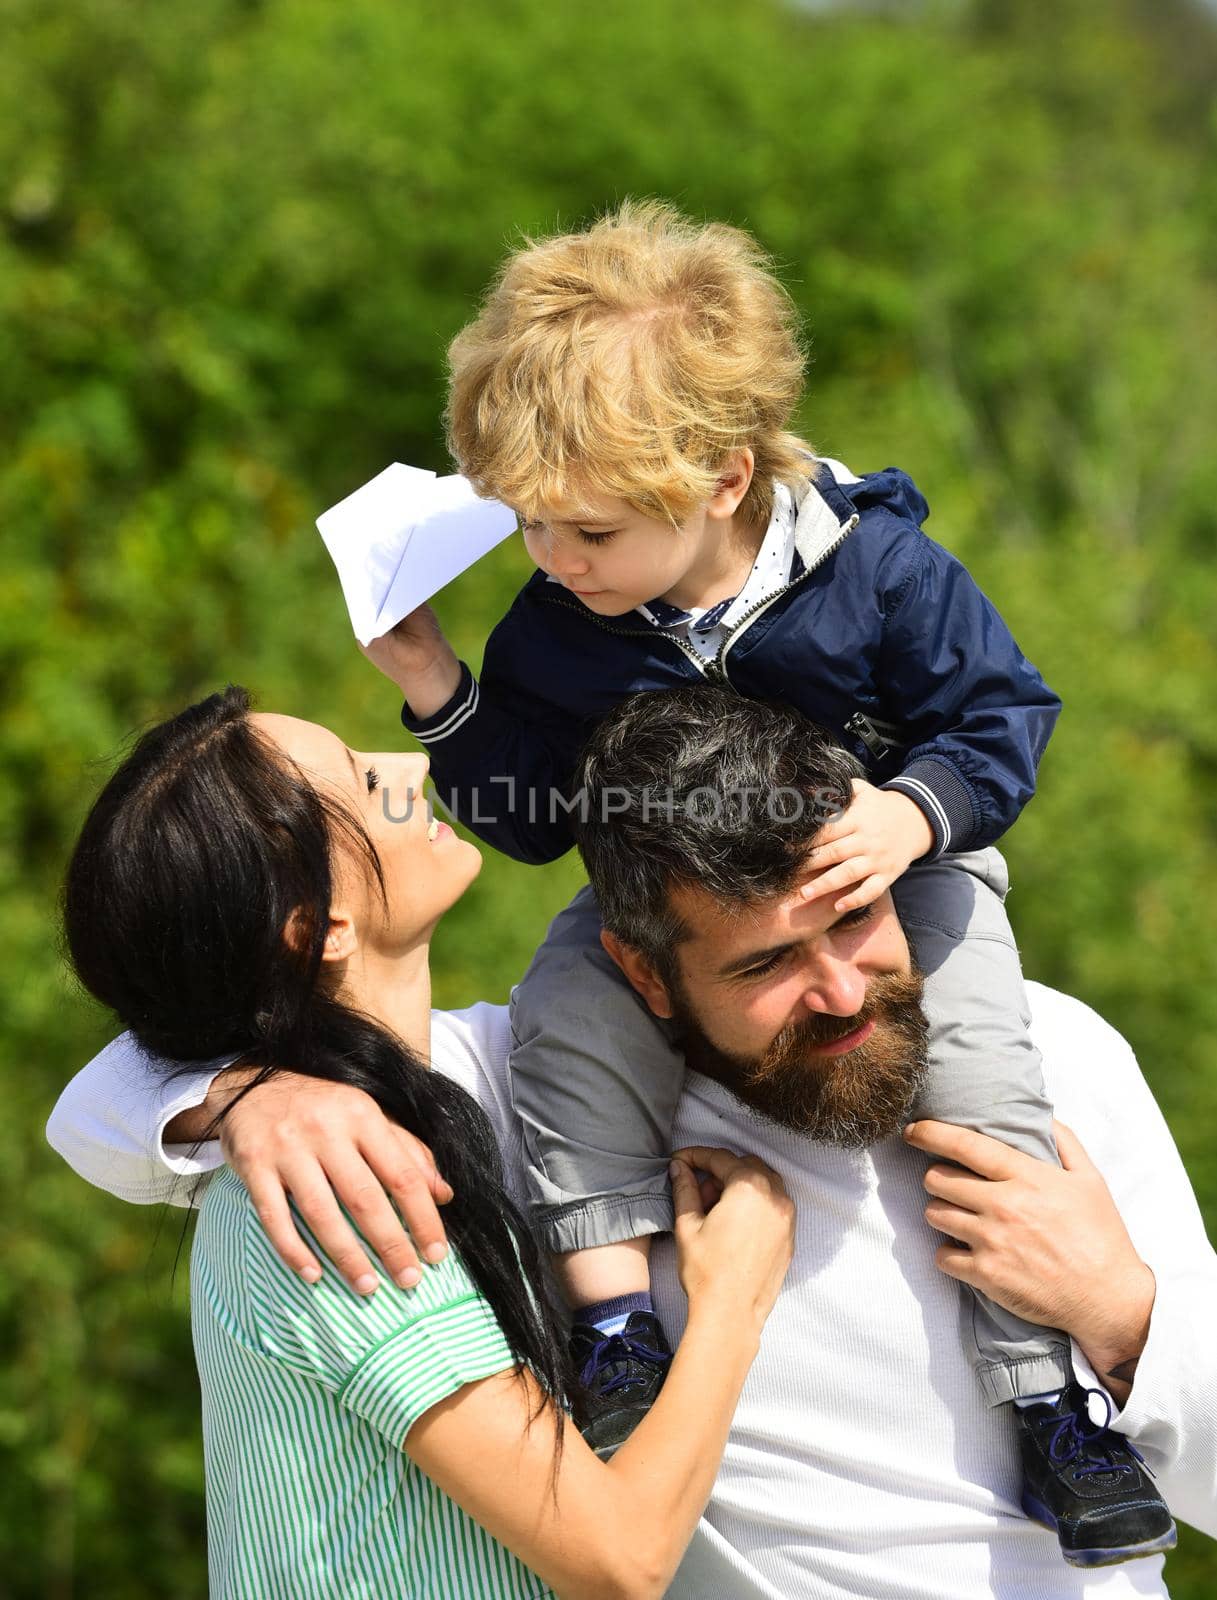 Happy family - mother, father and son on sky background in summer. Happy family - child son playing with paper airplane. Dream of flying. Cute boy with parents playing outdoor